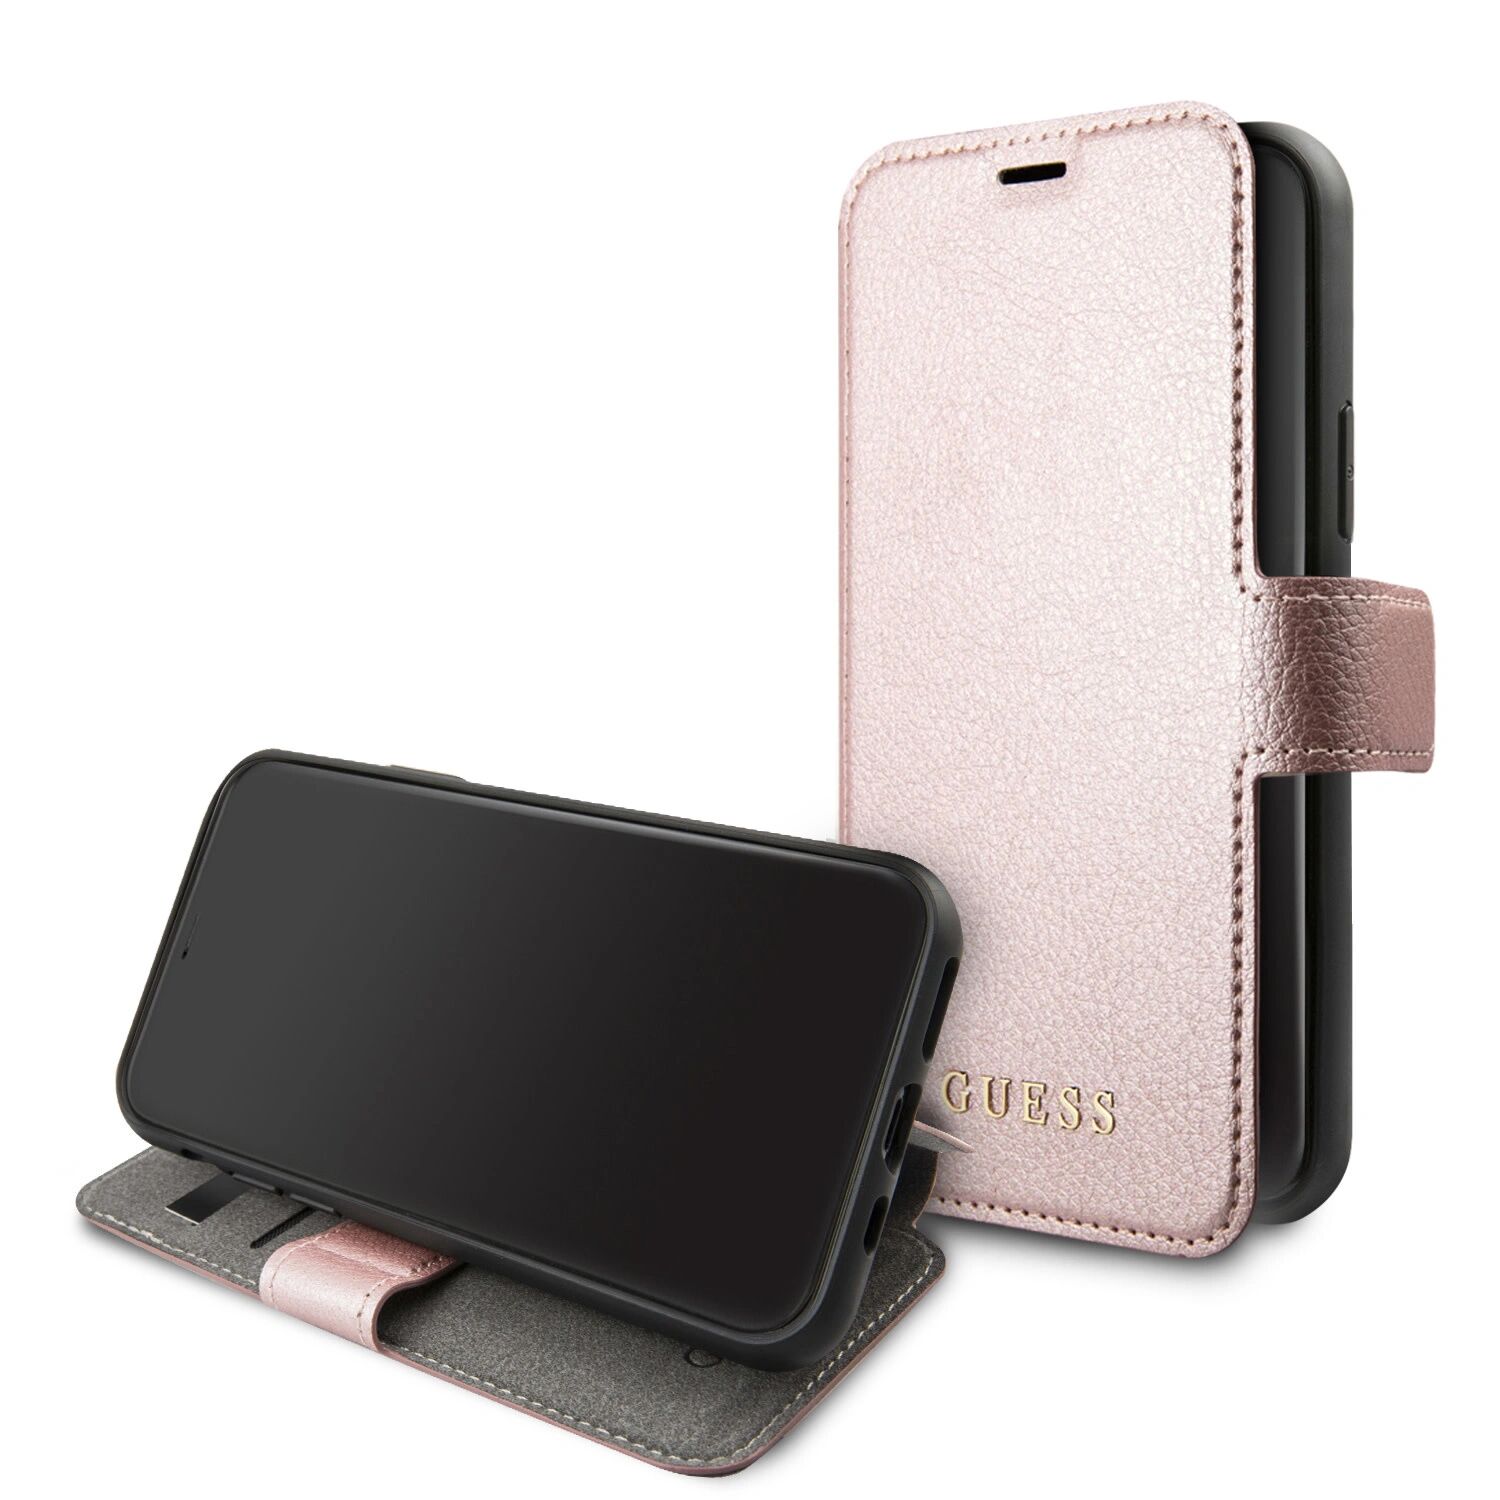 Guess Pouzdro / kryt pro iPhone 12 / 12 Pro - Guess, Iridescent Book Pink